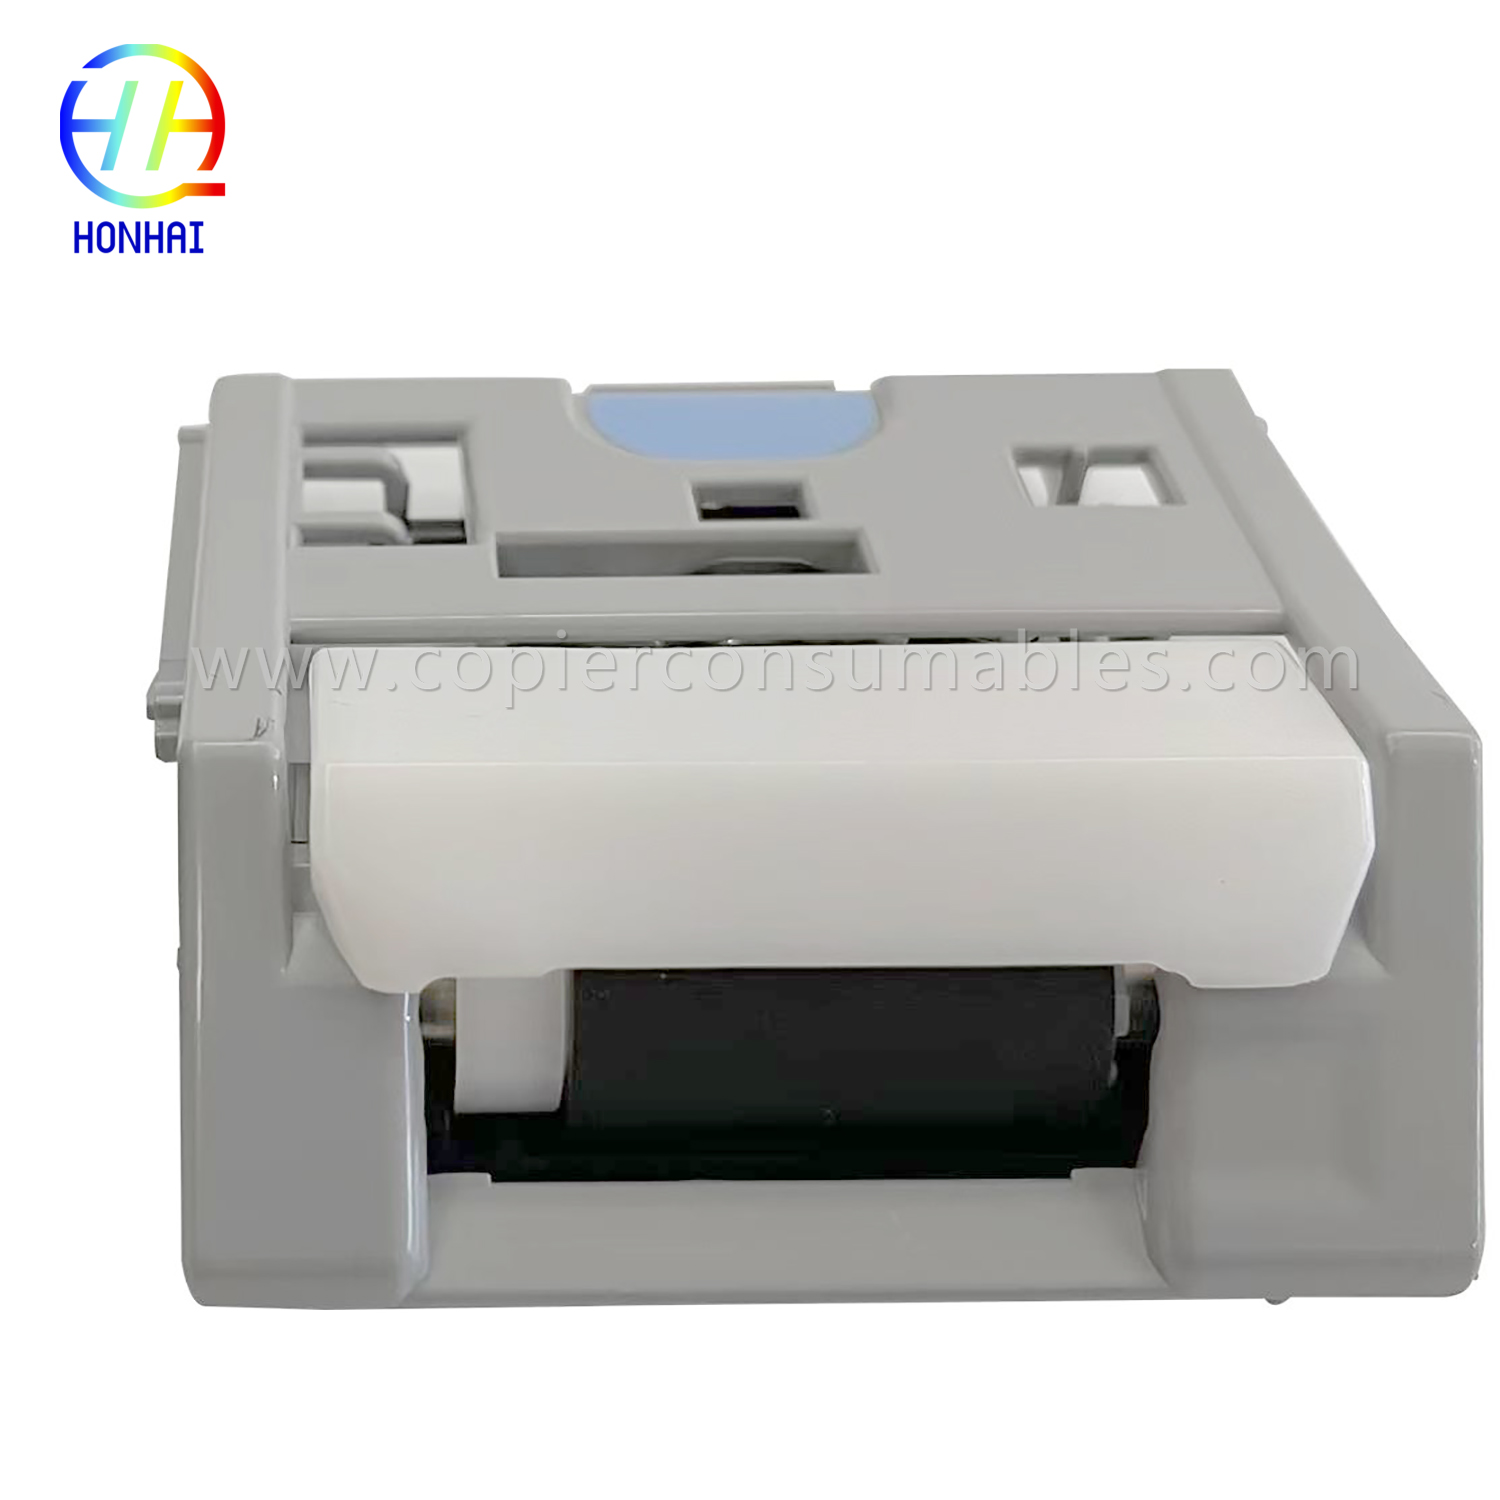 I-tray 2-5 Separation Roller Assy ye-HP M552 M553 M577 (RM2-0064-000)